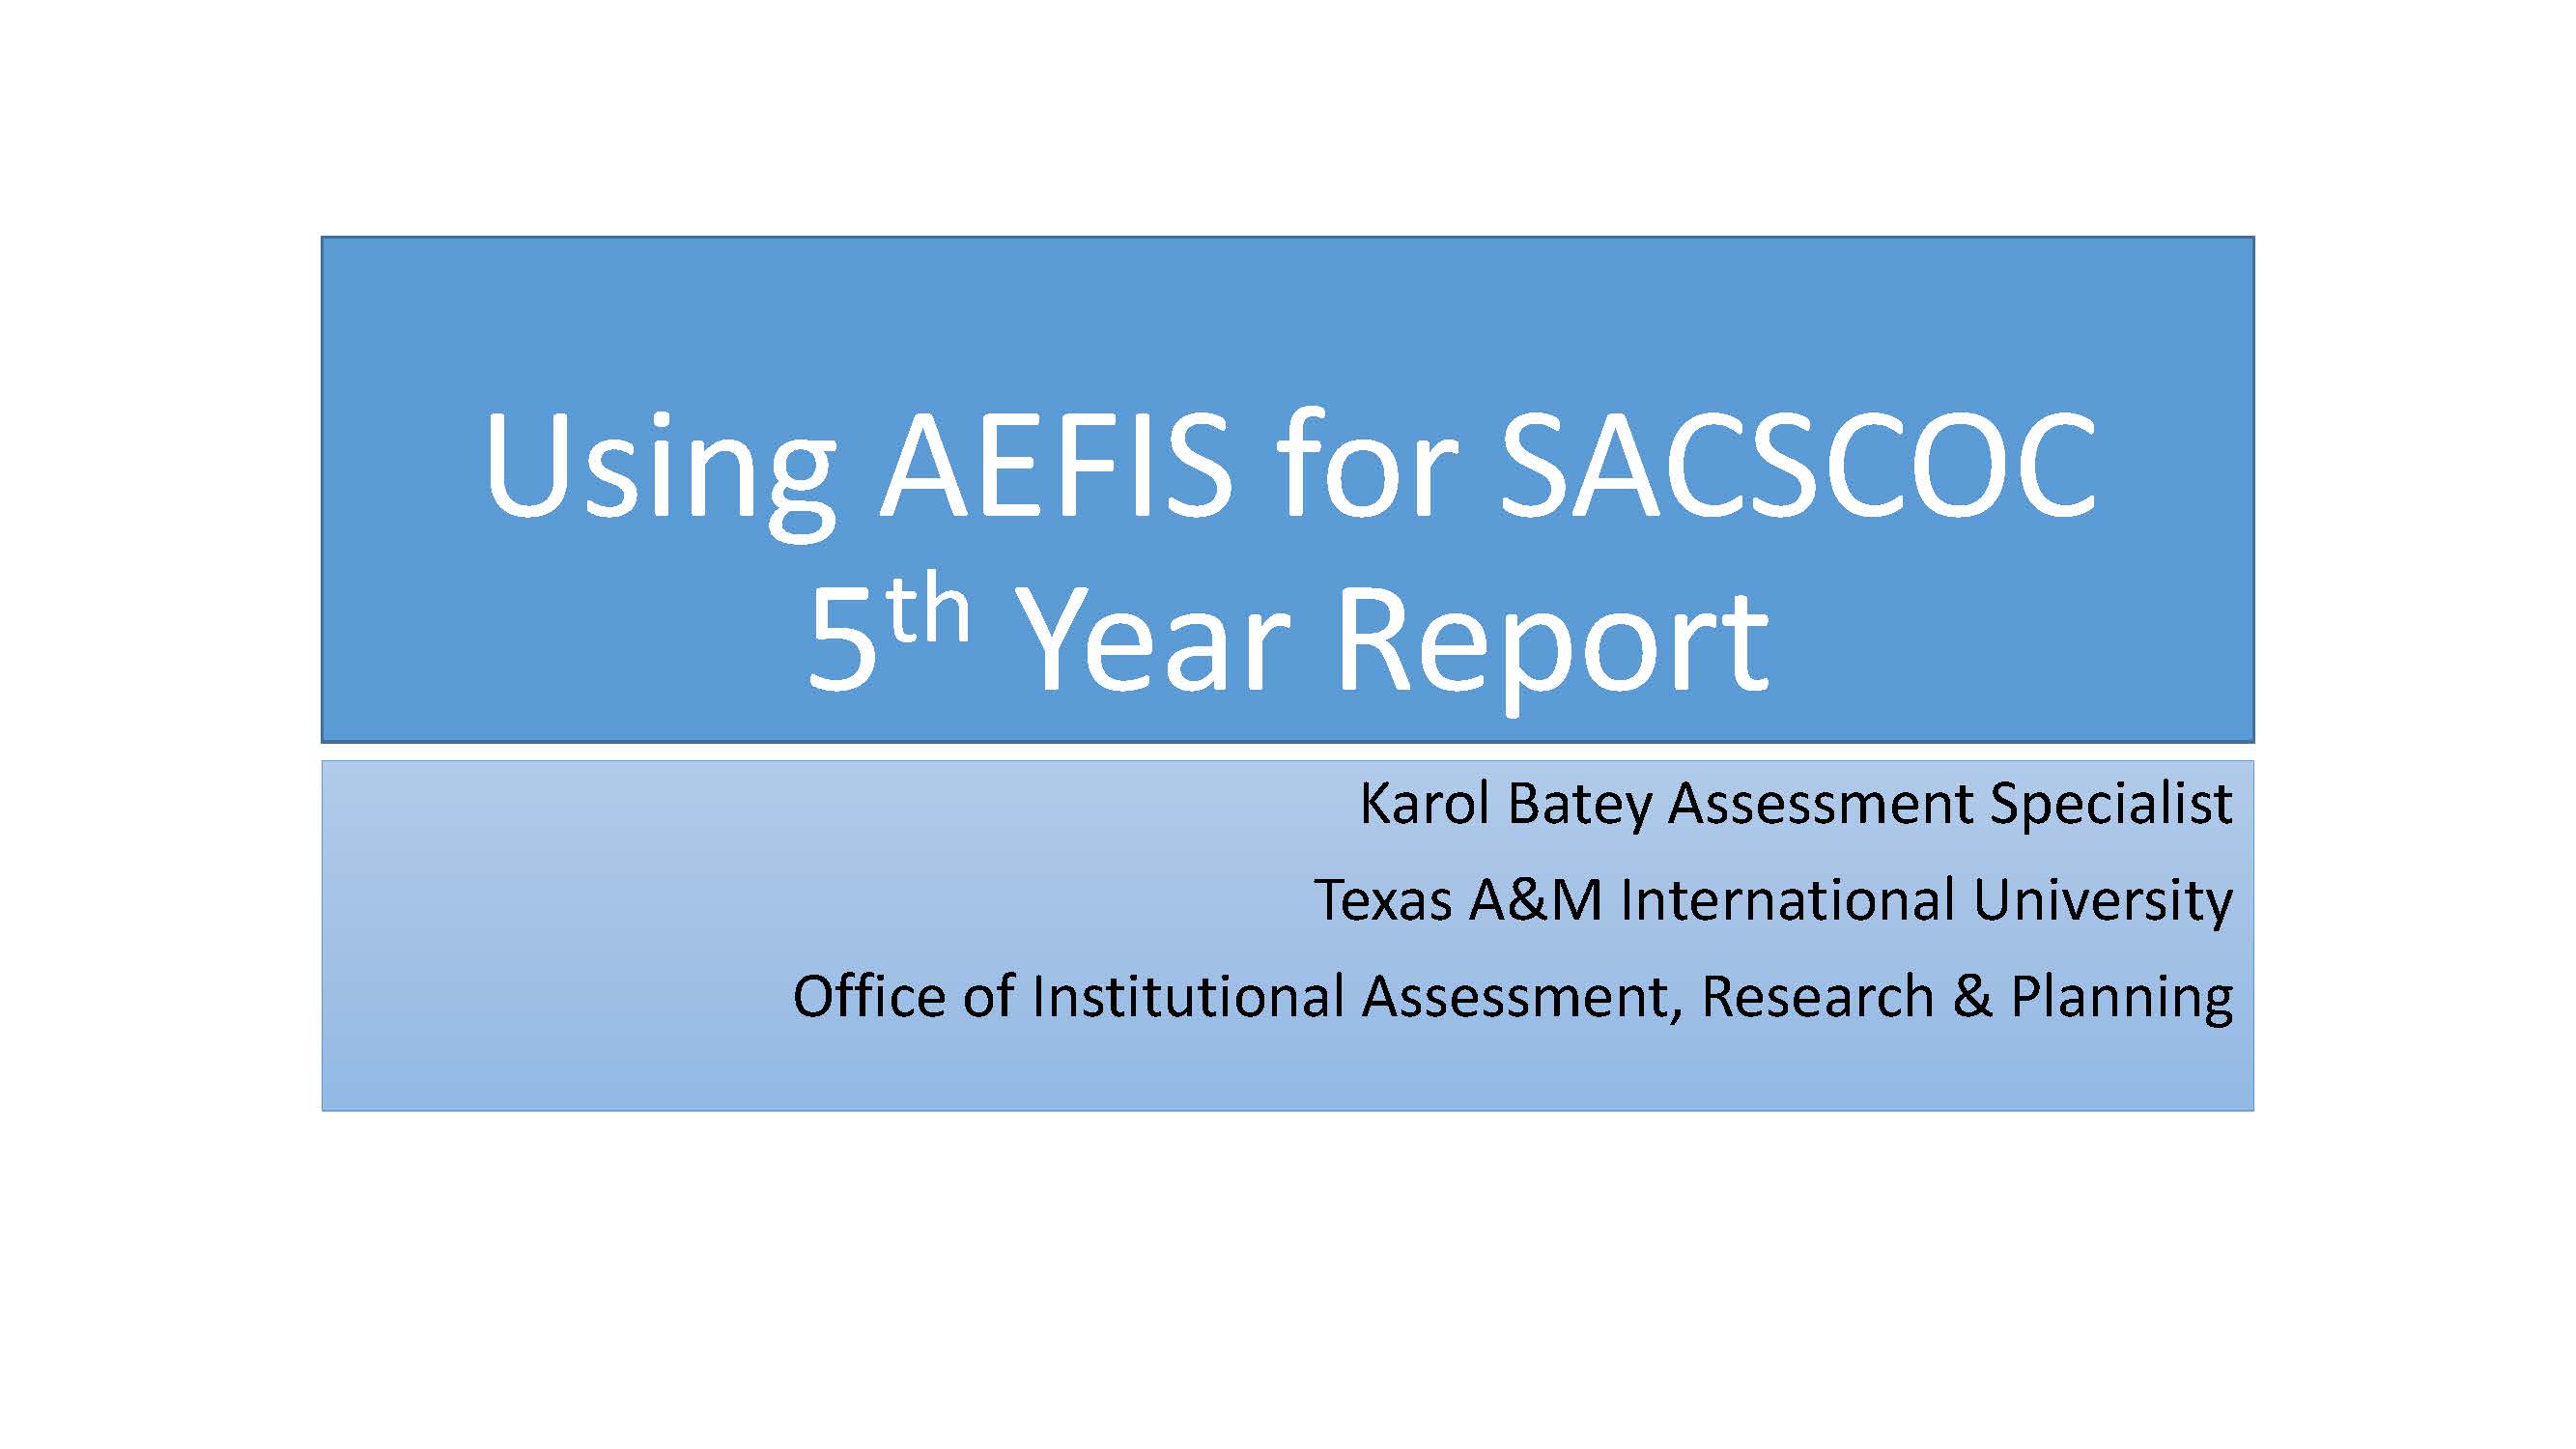 Using AEFIS for 5th Year Reports